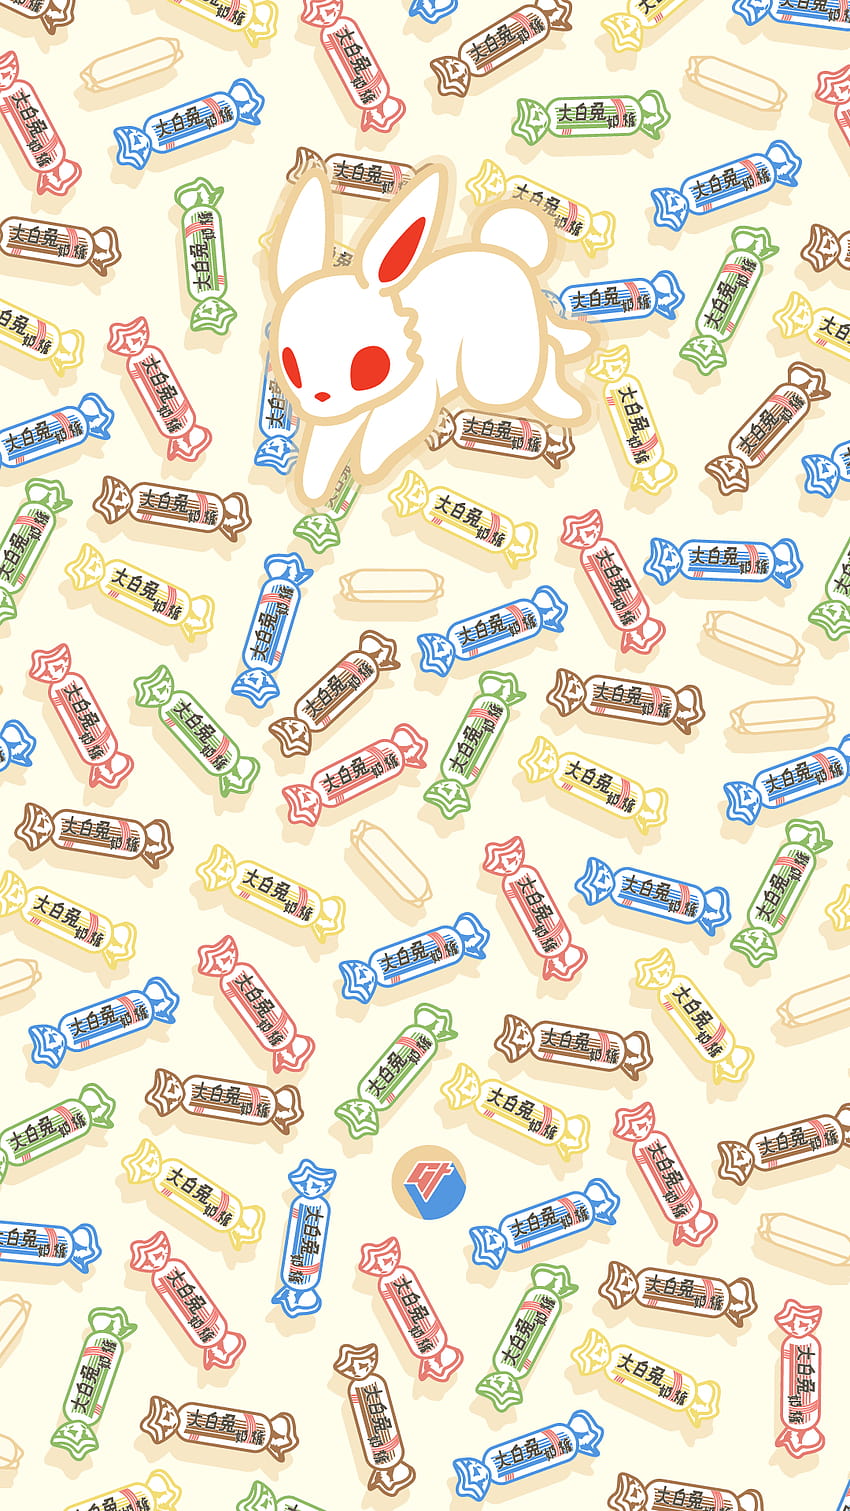 Deck your phone with these nostalgic Chinese snack HD phone wallpaper